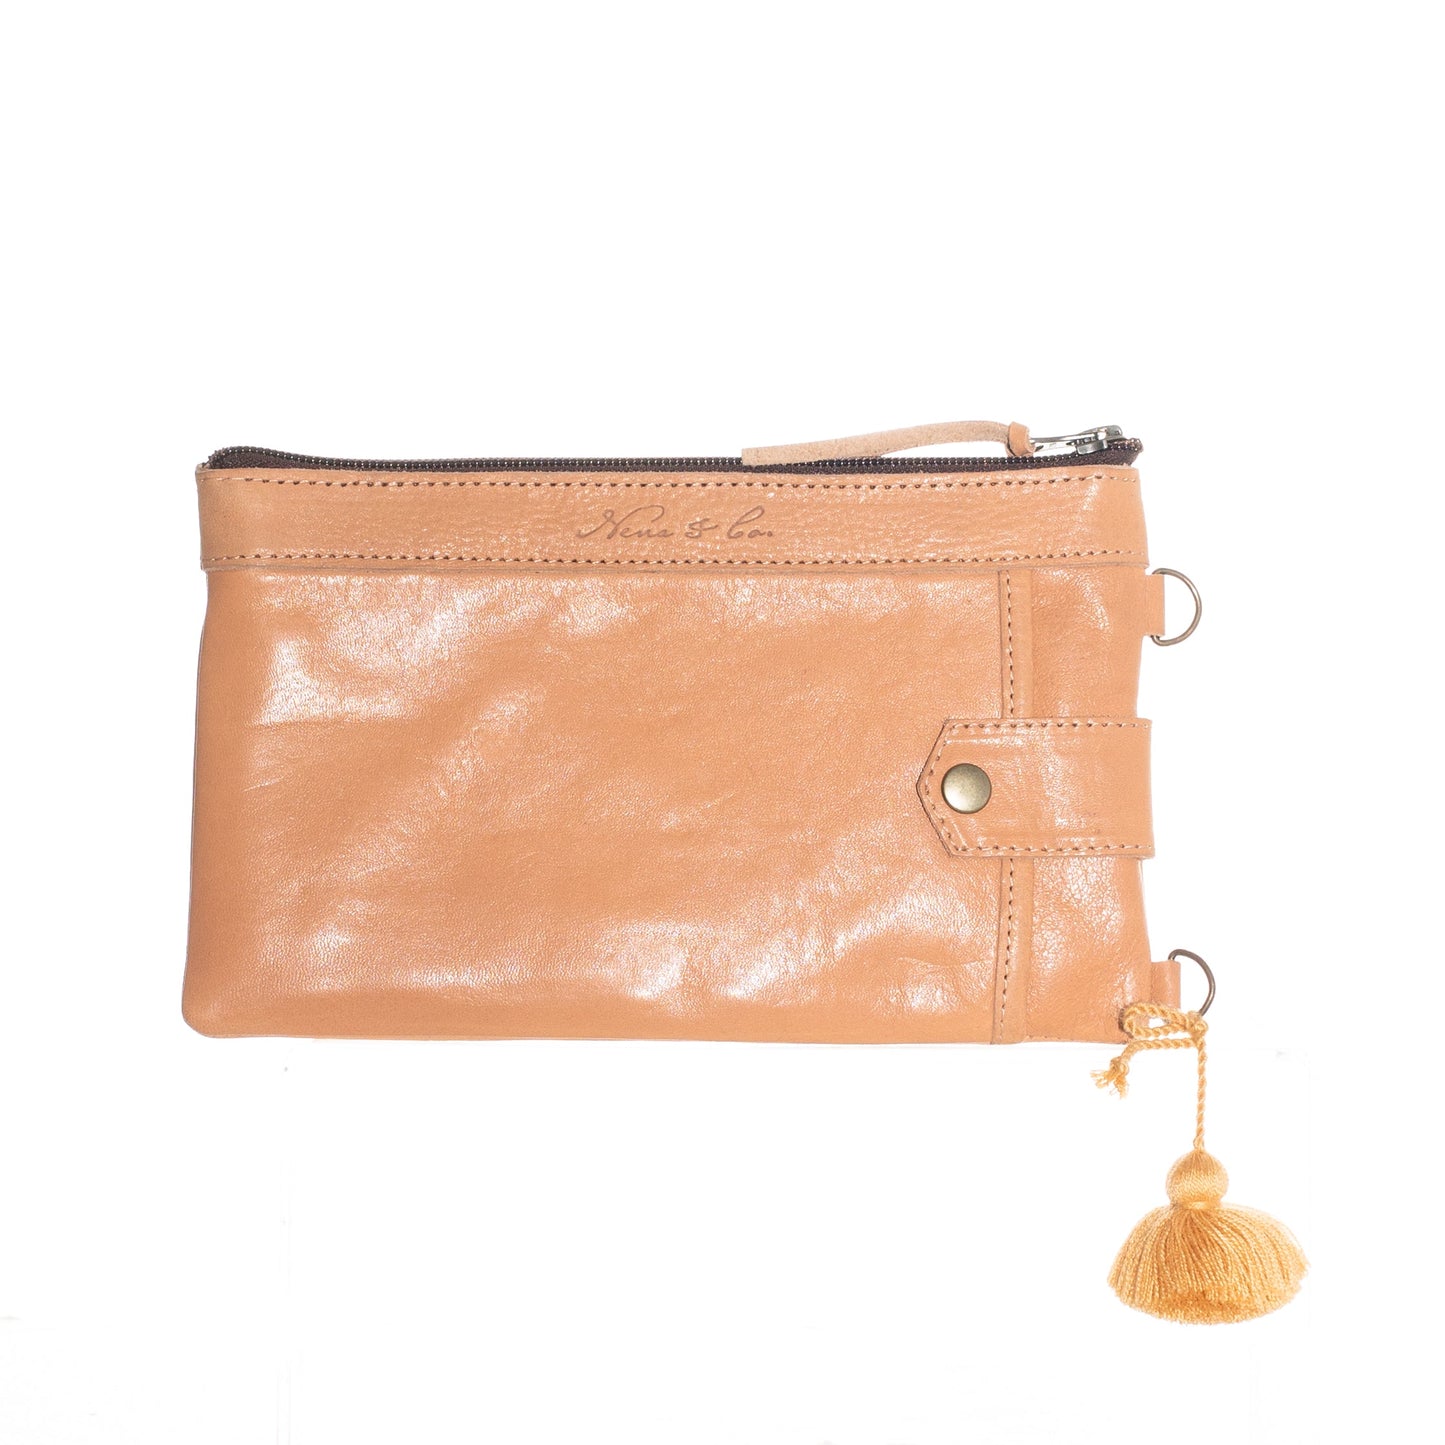 THE EVERYTHING CLUTCH + UTILITY STRAP SET - FULL LEATHER COLLECTION - SANDSTONE